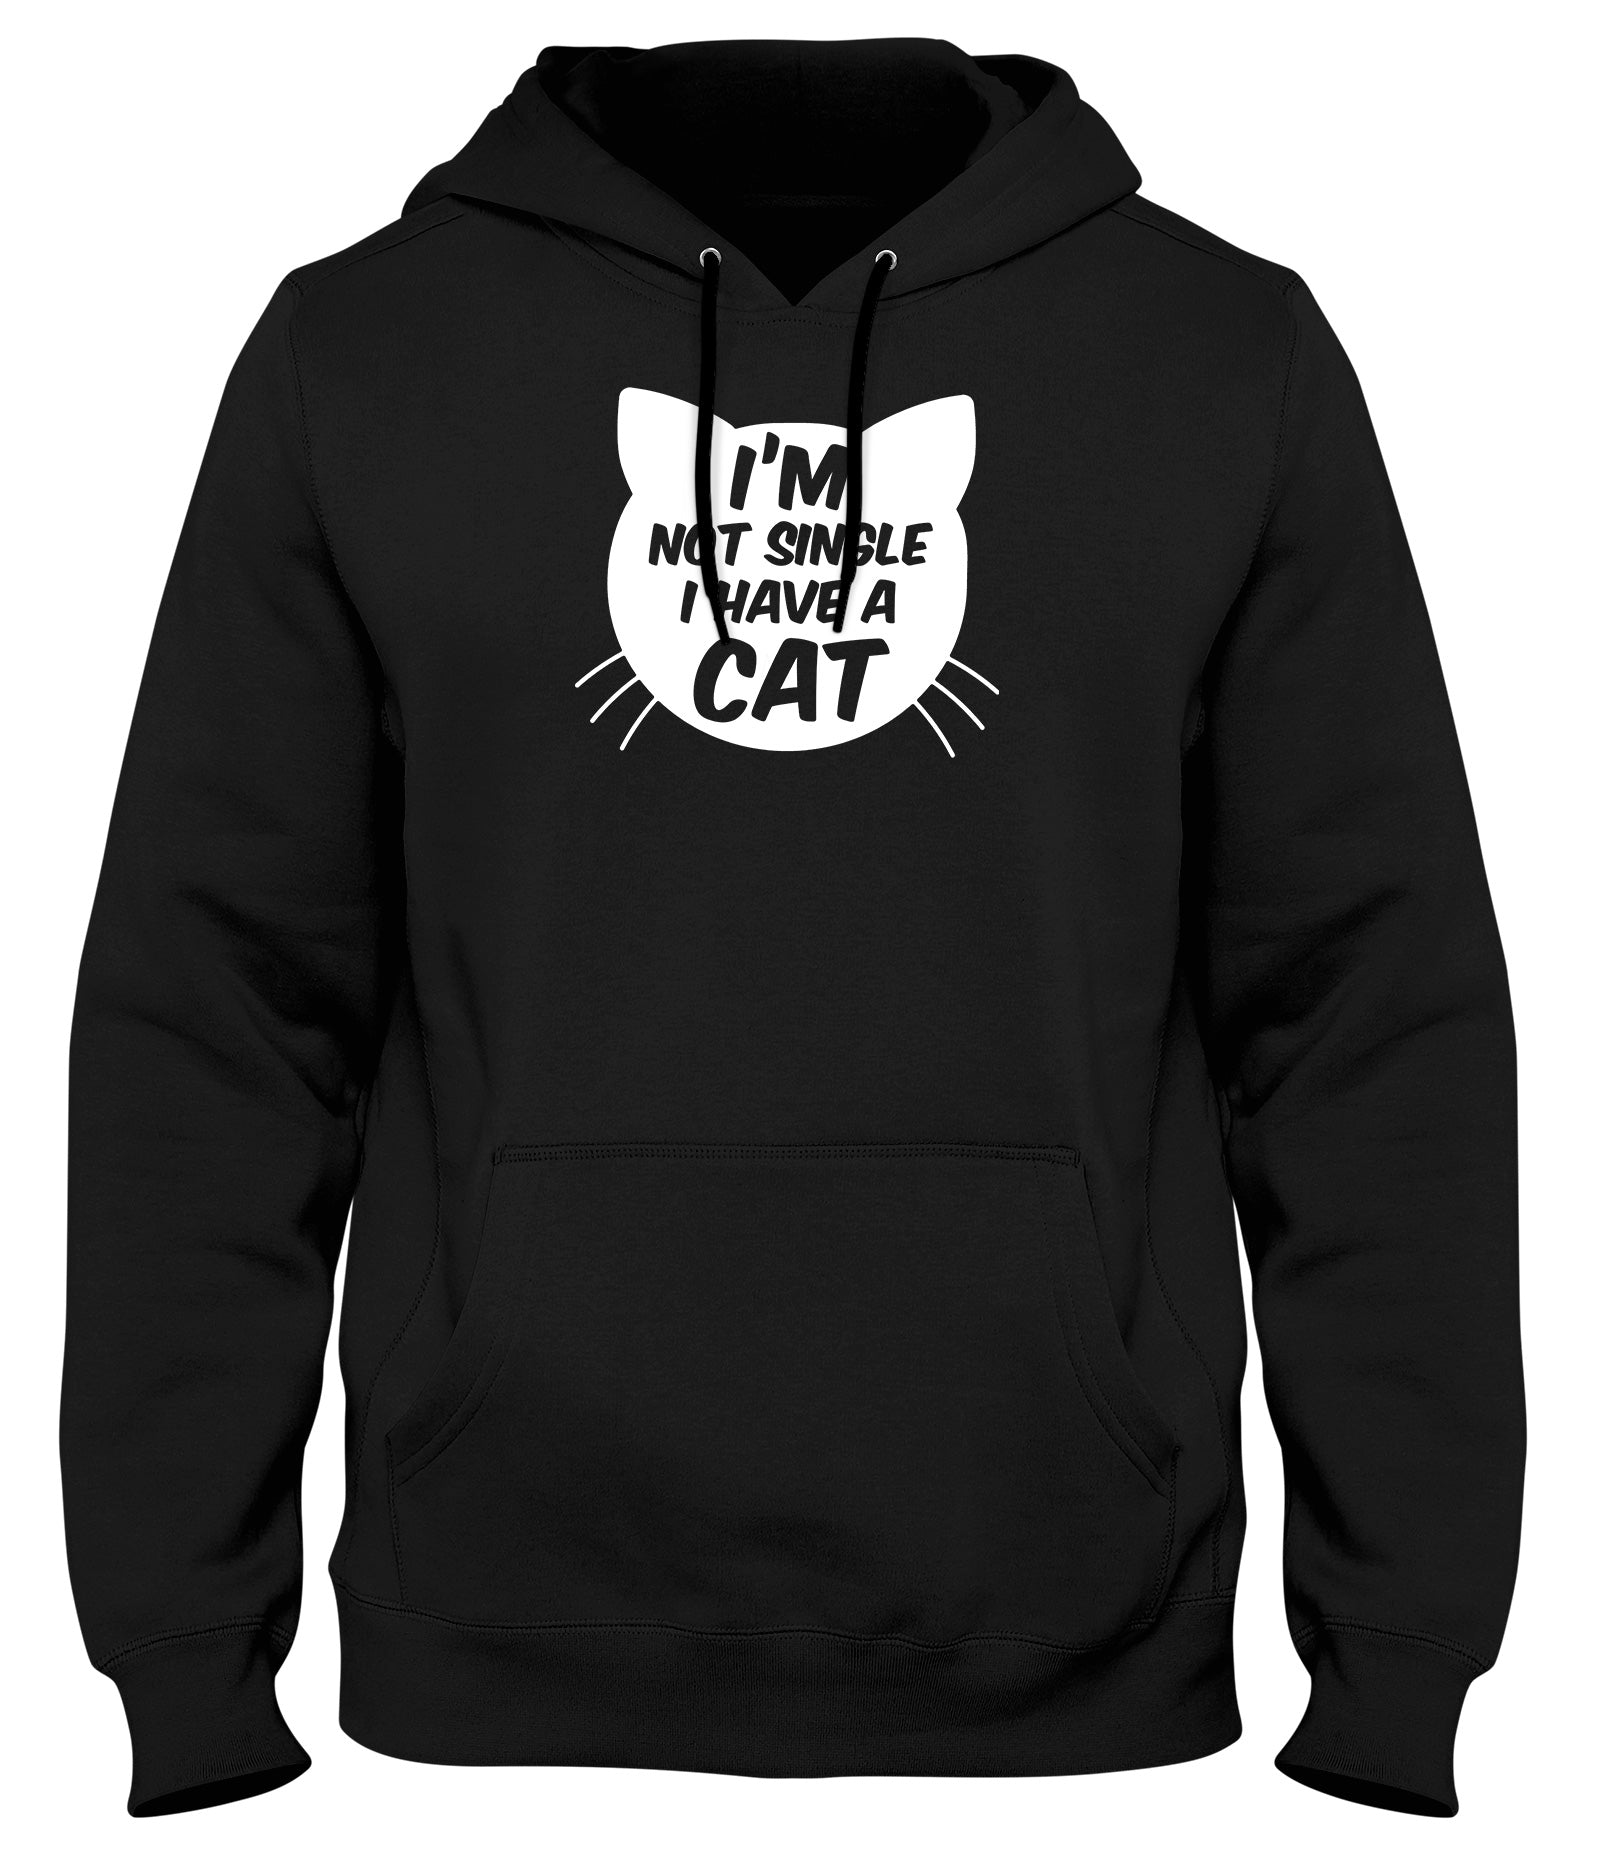 I'M NOT SINGLE I HAVE A CAT WOMENS LADIES MENS UNISEX HOODIE